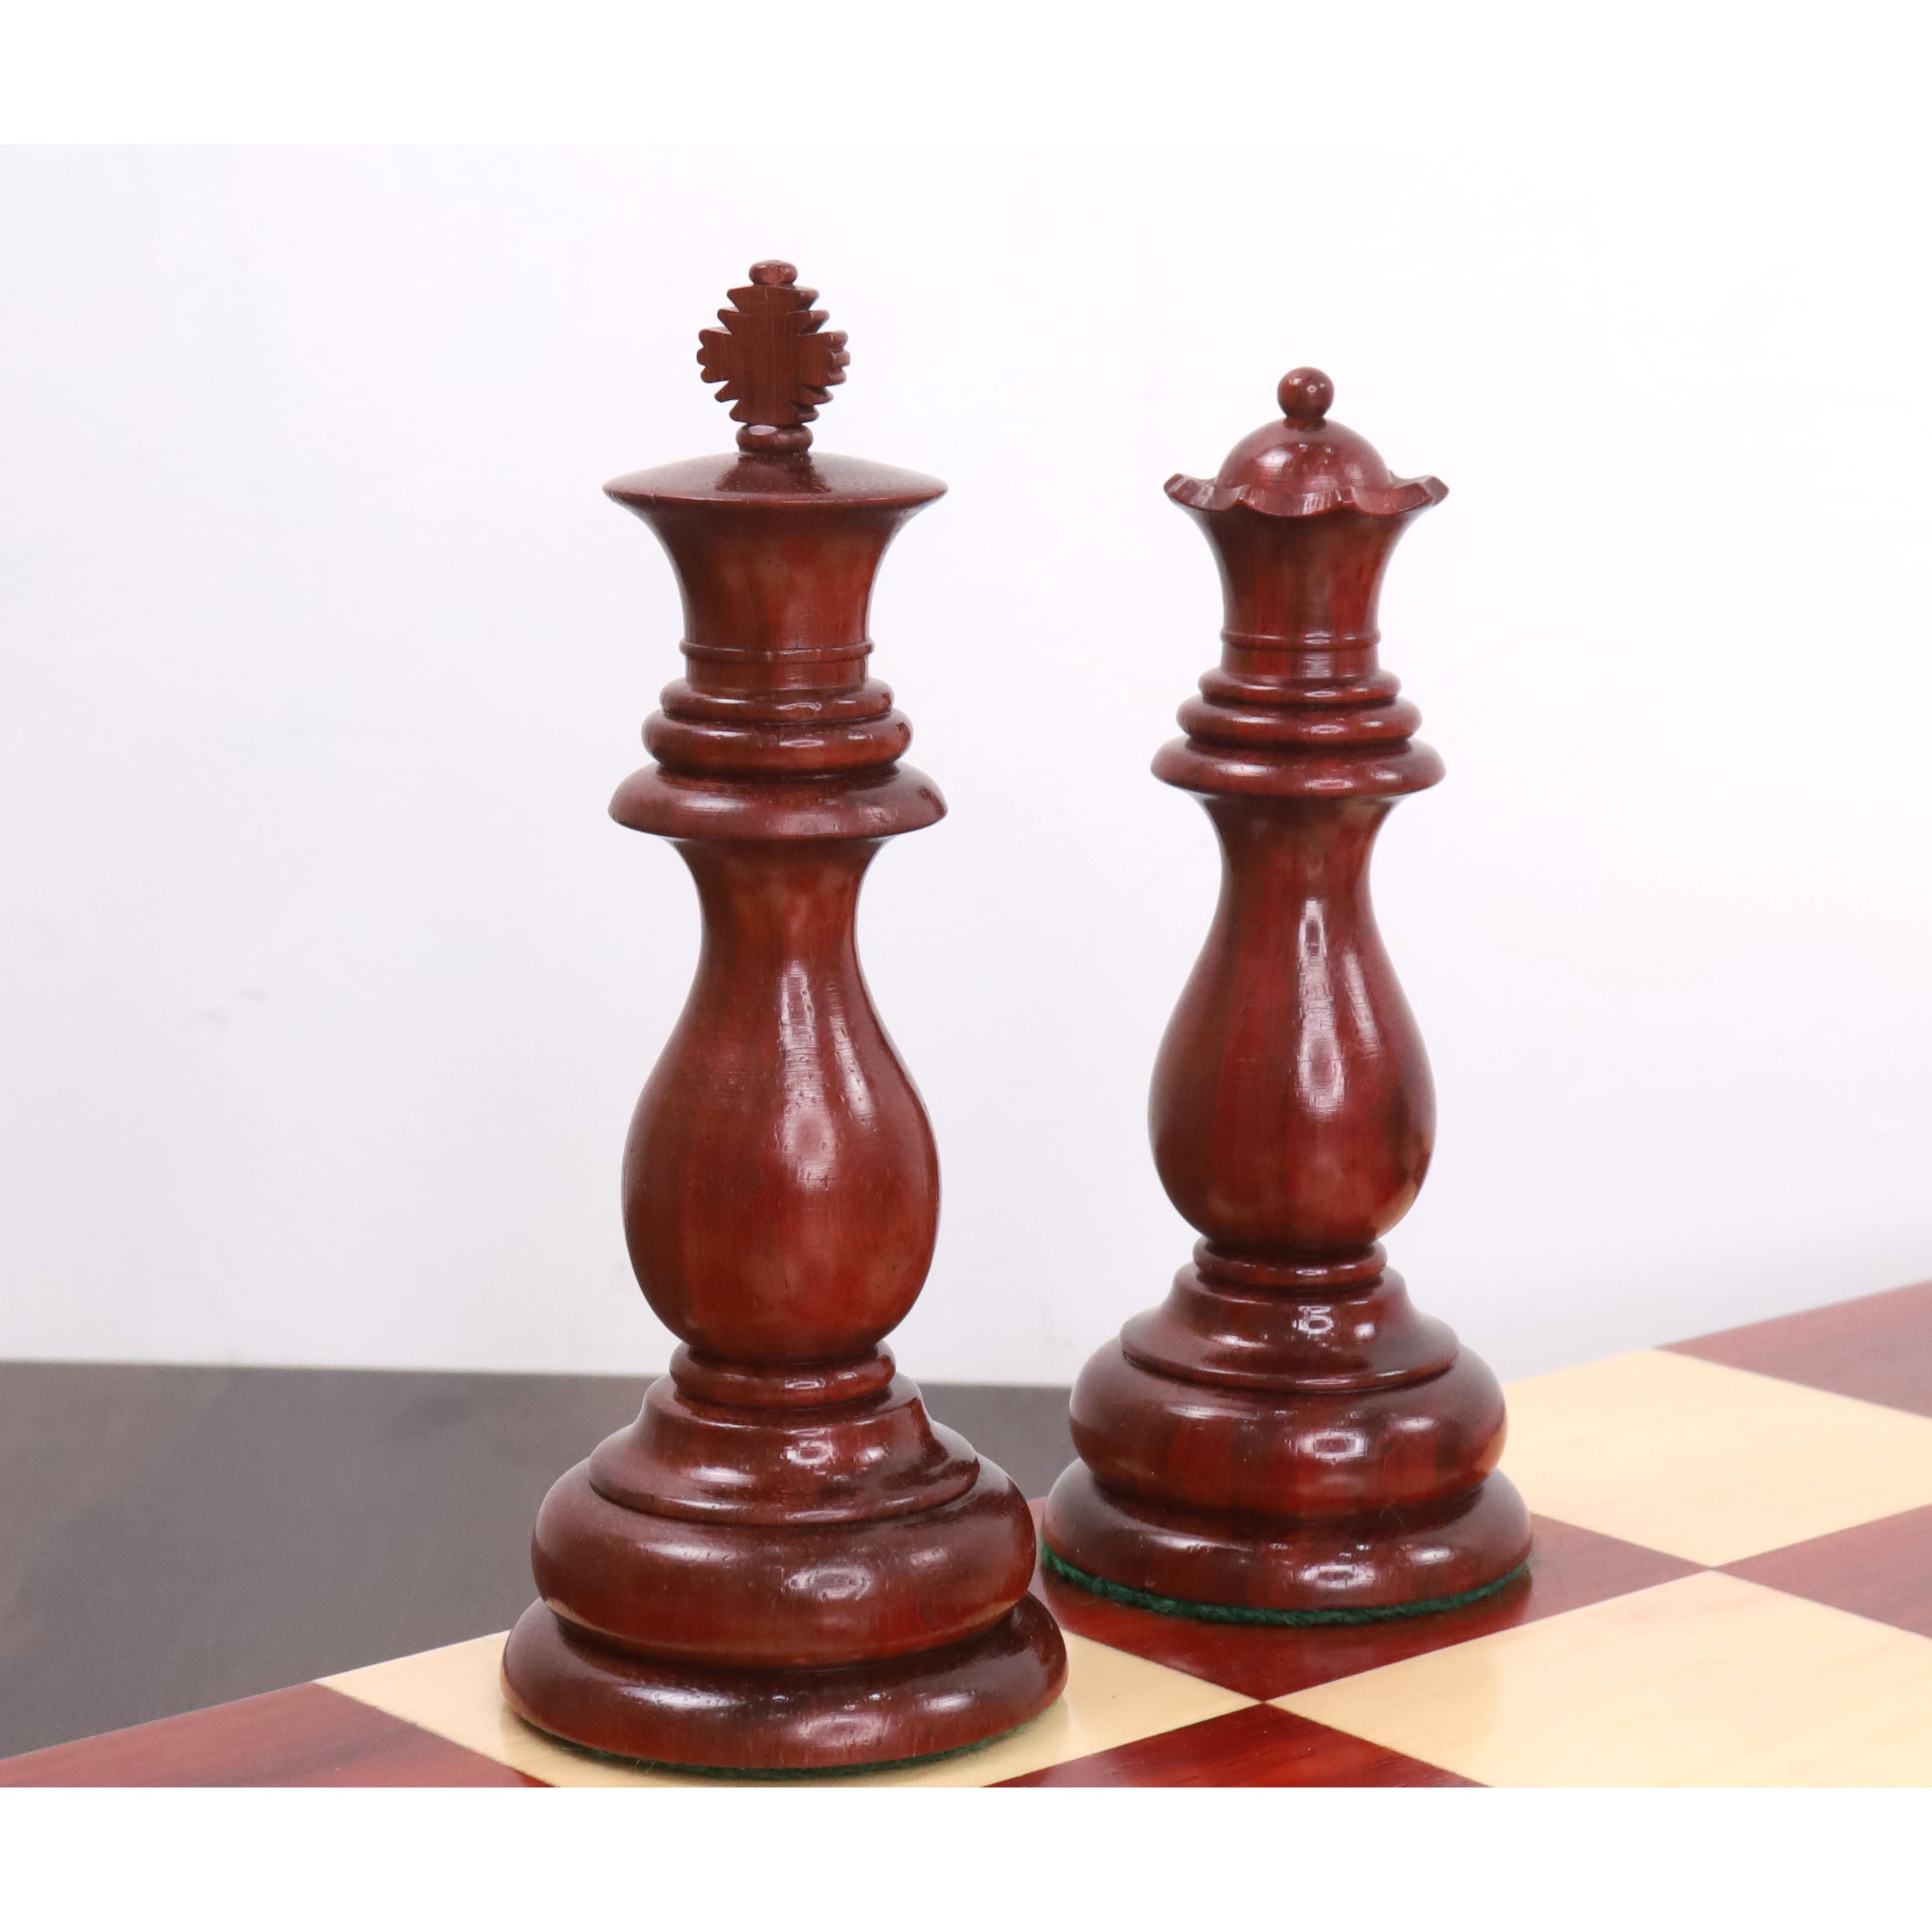 4.6" Medallion Luxury Staunton Chess Set- Chess Pieces Only -Triple Weight Bud Rosewood